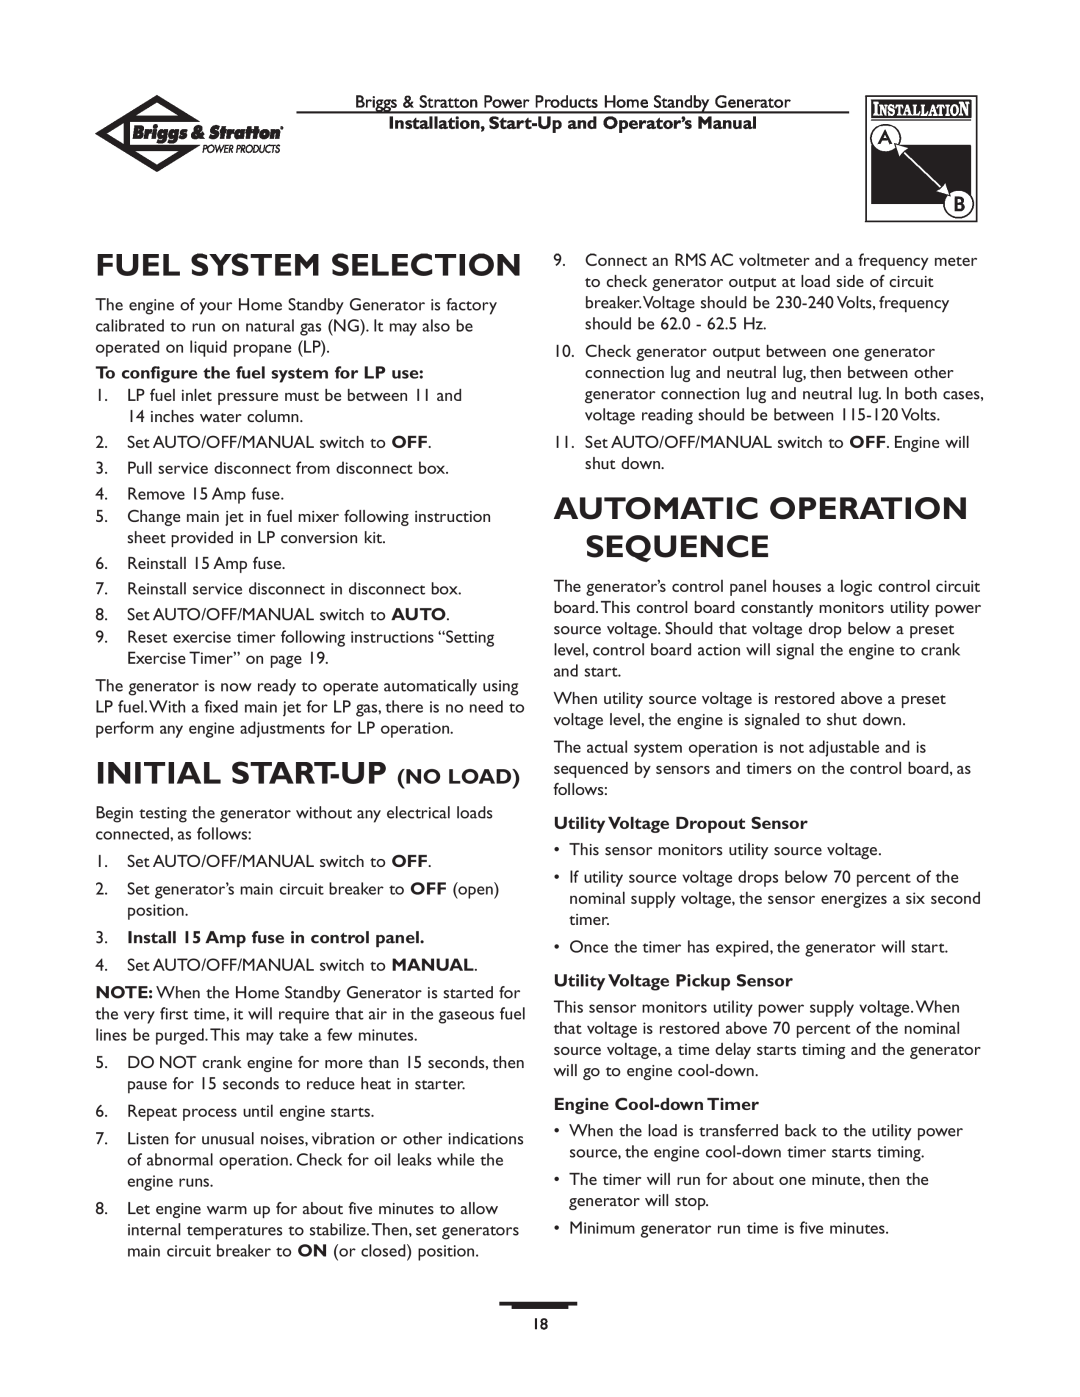 Briggs & Stratton 01897-0 manual Fuel System Selection, Automatic Operation Sequence, Initial Start-Up No Load 